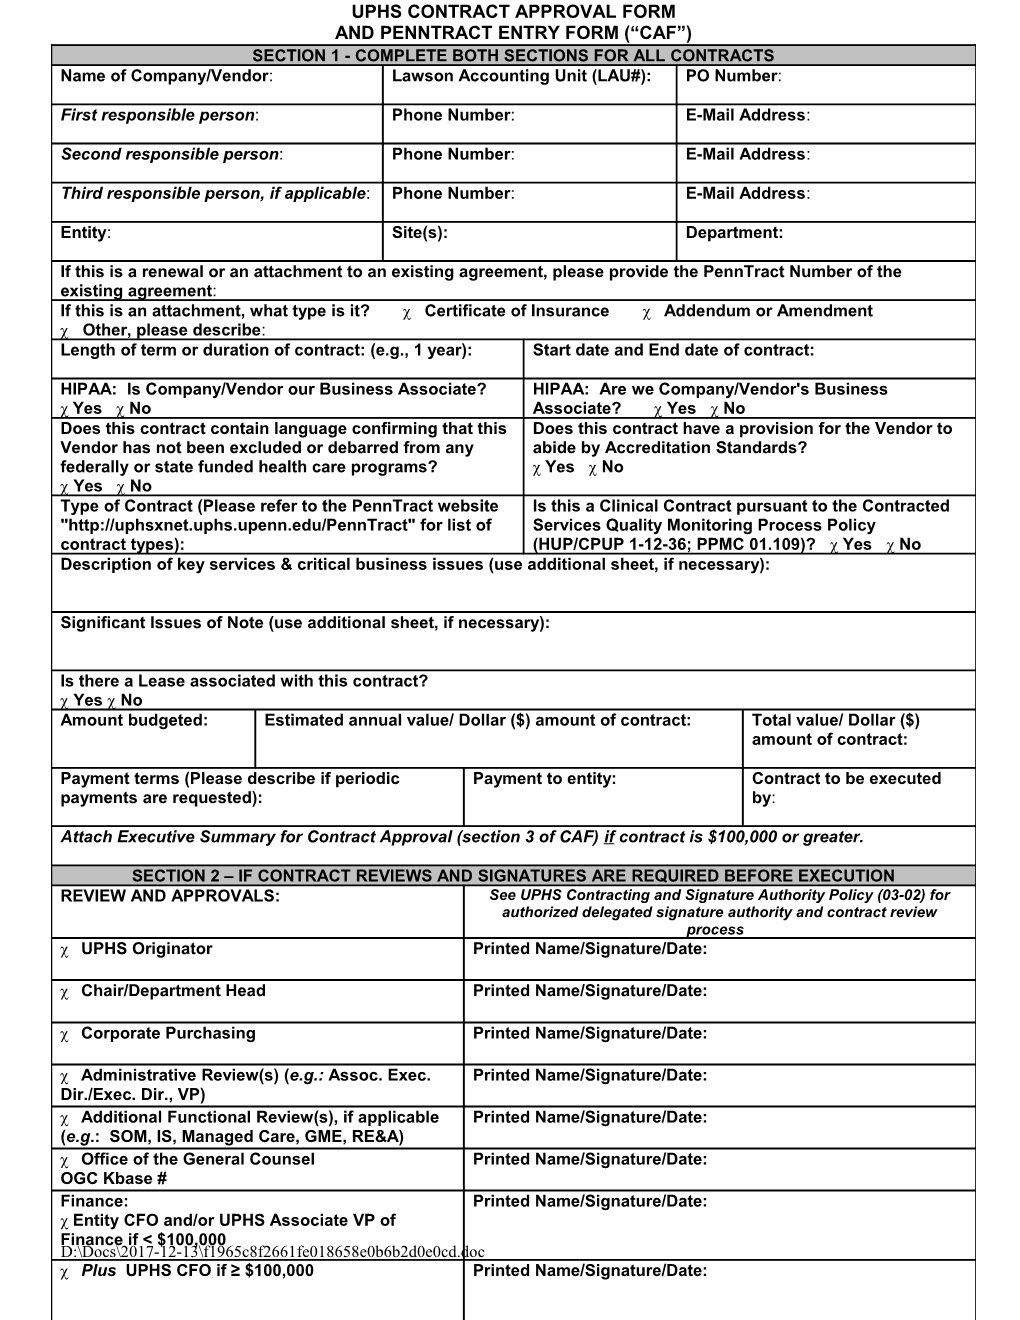 Uphs Contract Approval Form